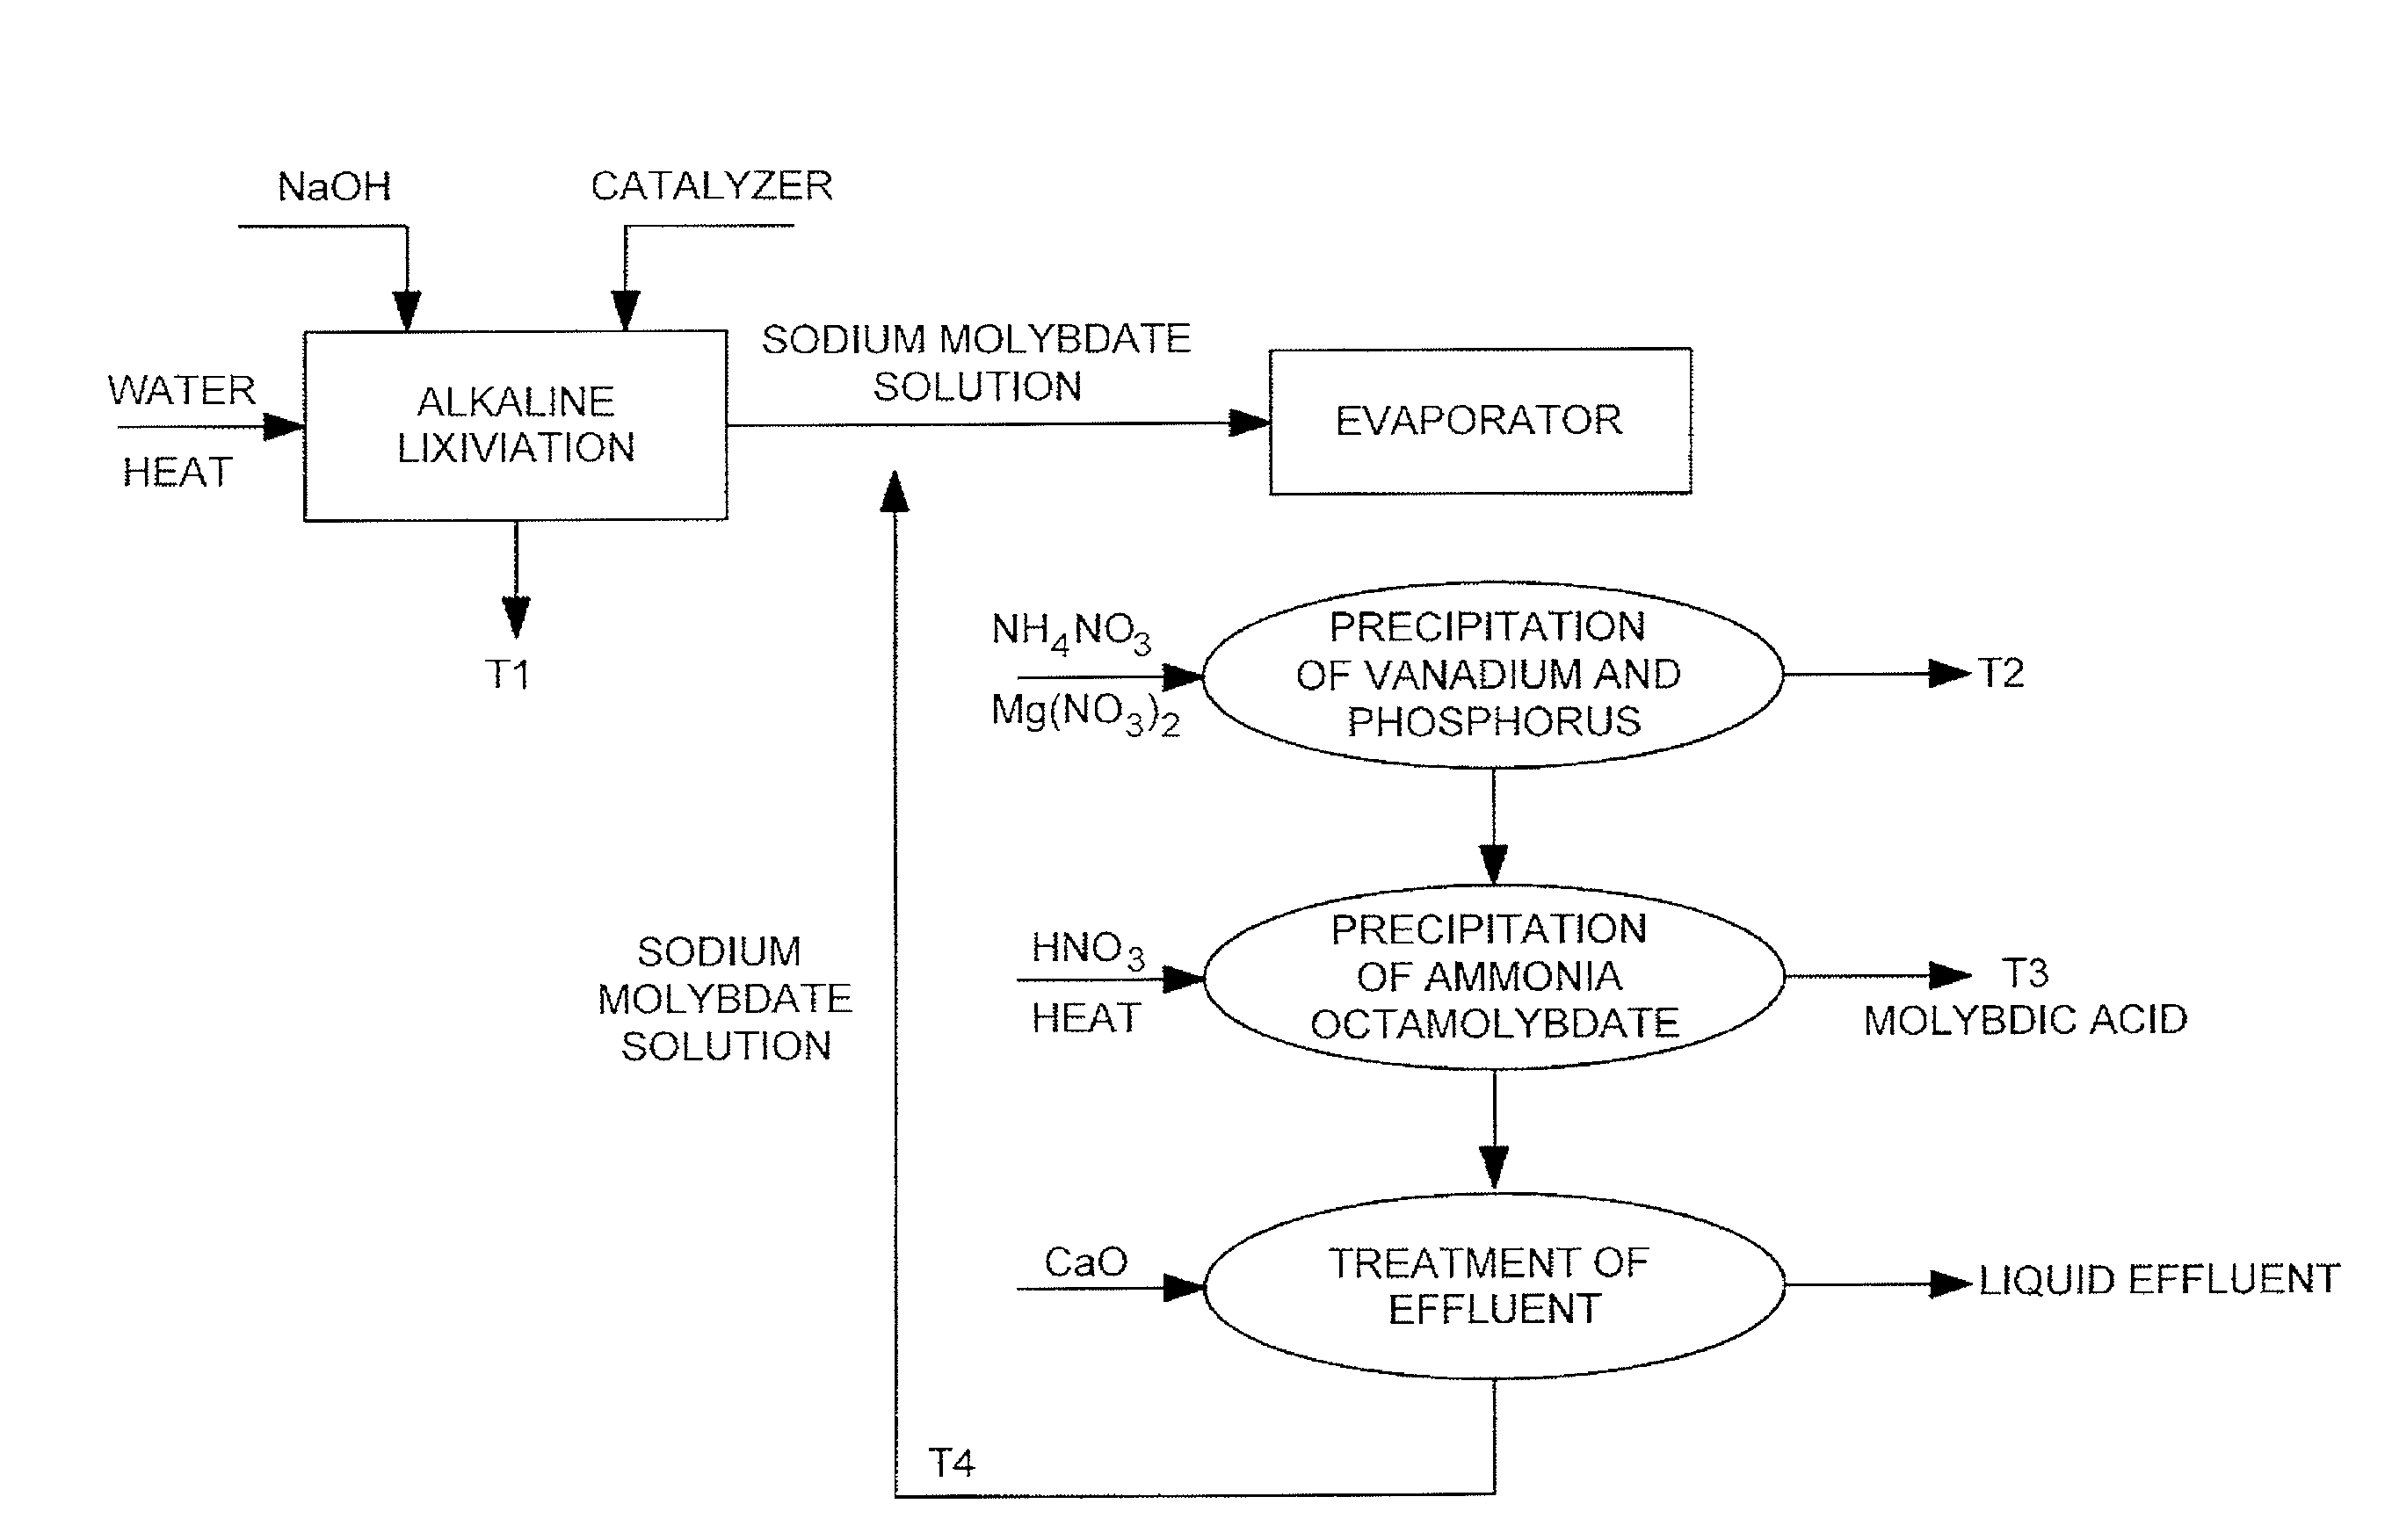 Process to produce molybdenum compounds, from spent molybdenum catalyzers, industrial residues and metal alloys